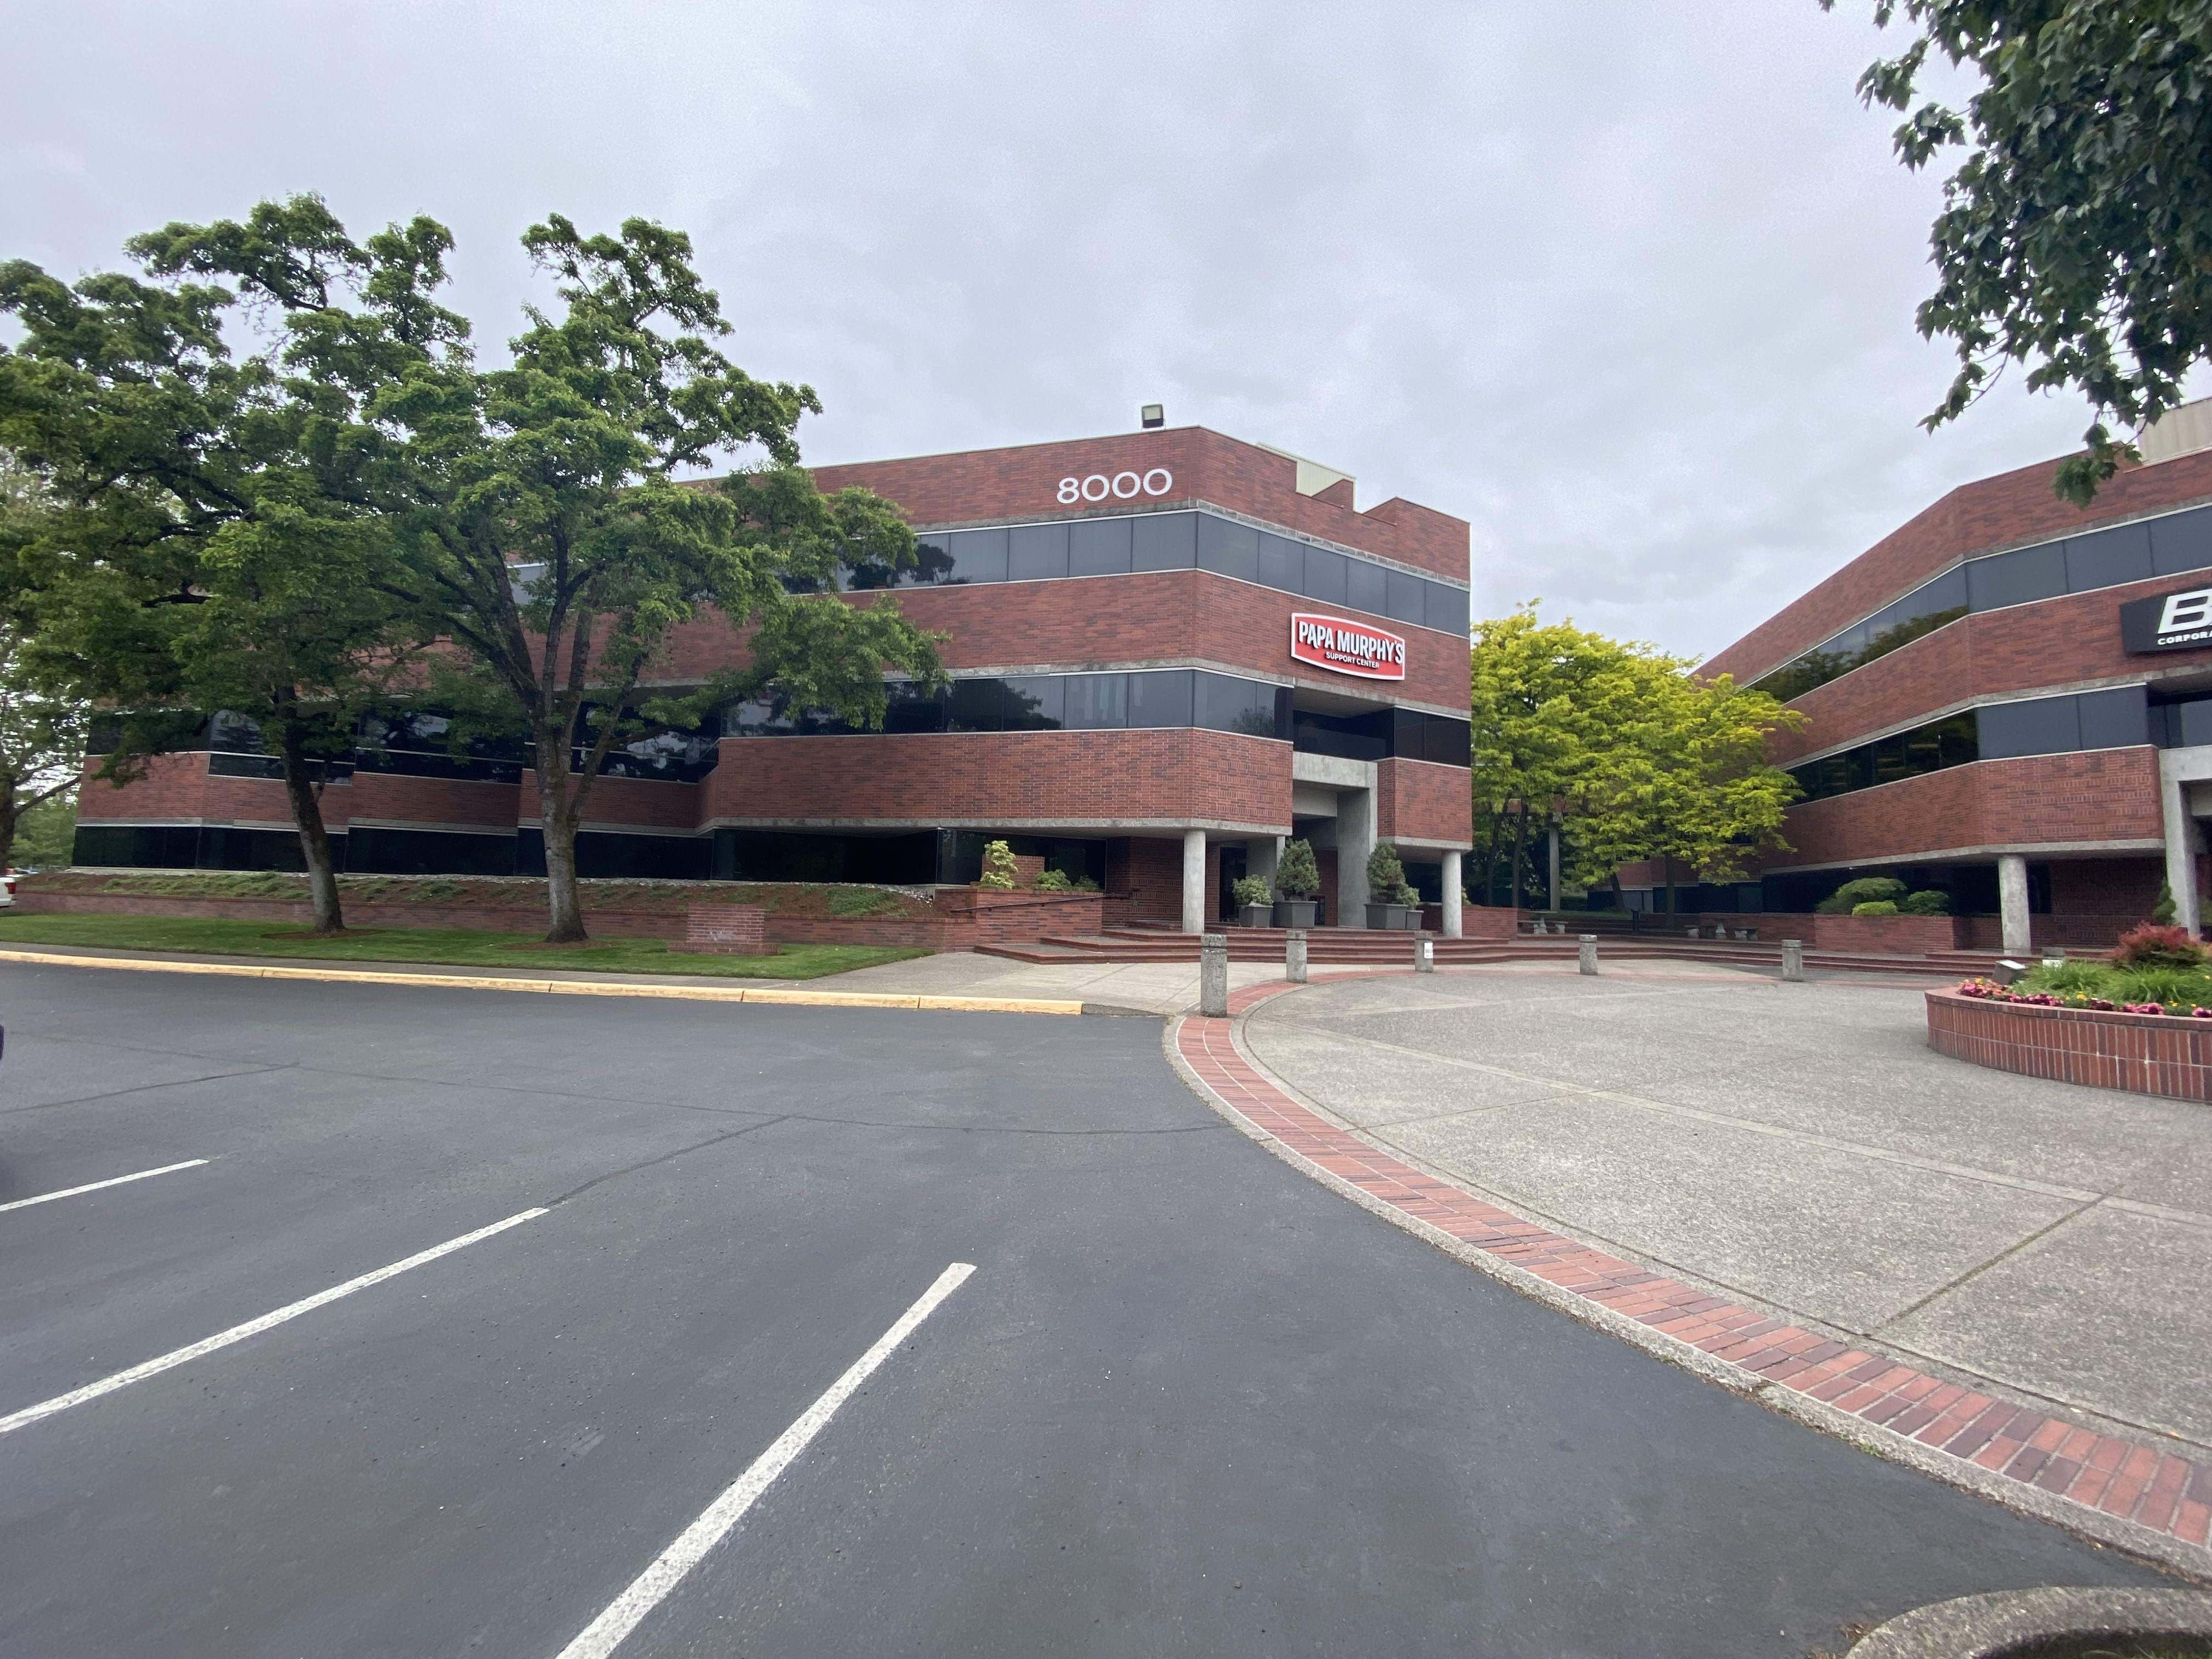 Sublease at 8000 NE Parkway Dr, Vancouver WA